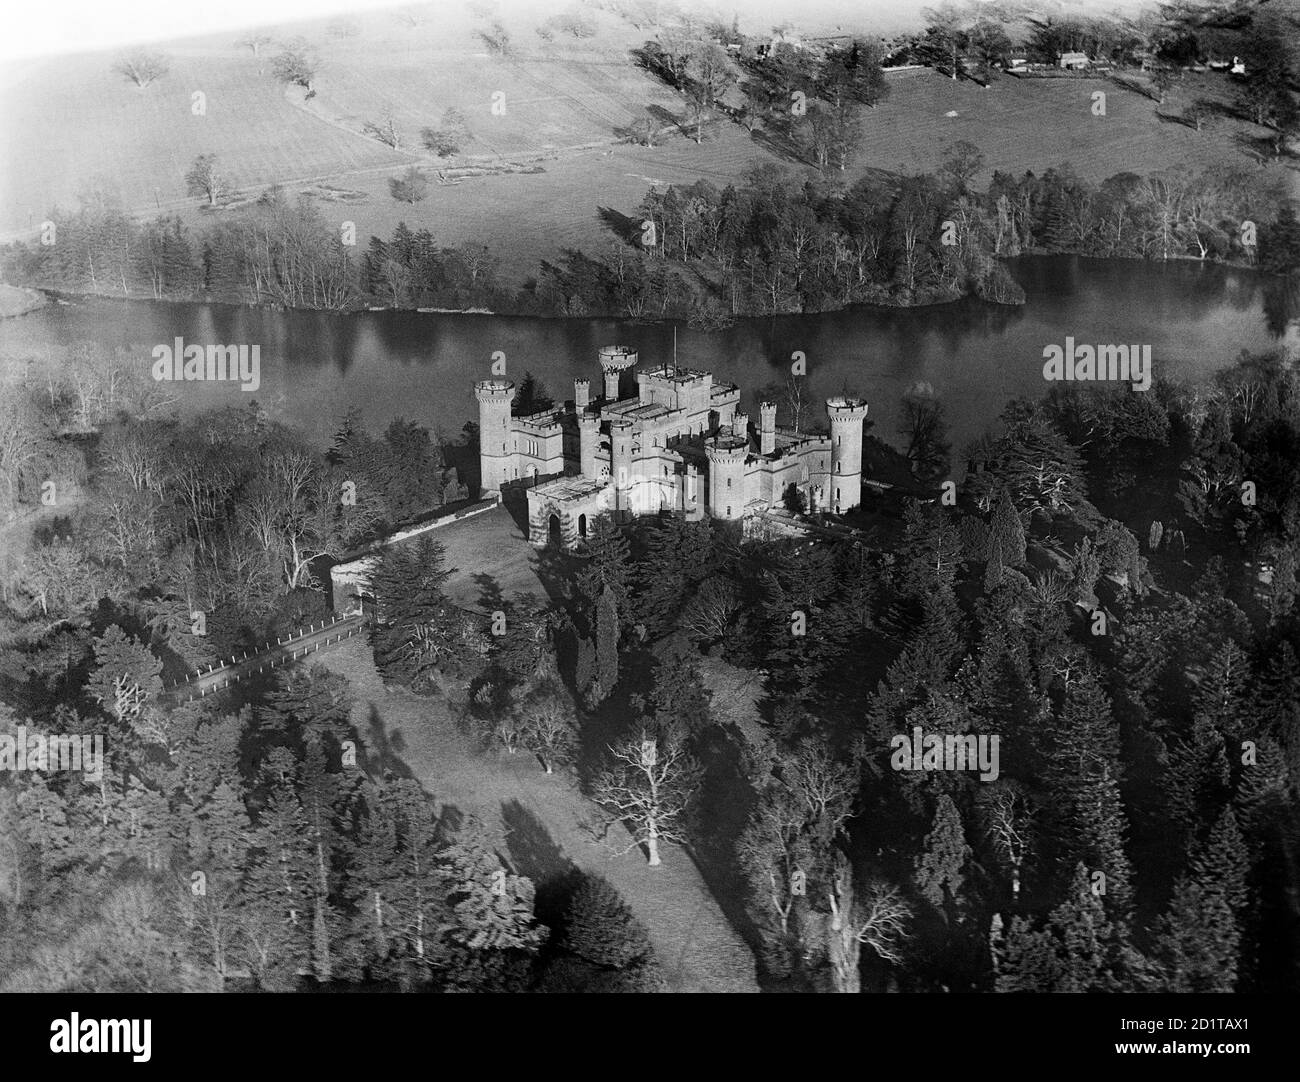 EASTNOR CASTLE, near Ledbury, Herefordshire. Aerial view of Eastnor Castle, built in 1812-20 by Robert Smirke to look like a medieval castle. Photographed in March 1921. Aerofilms Collection (see Links). Stock Photo